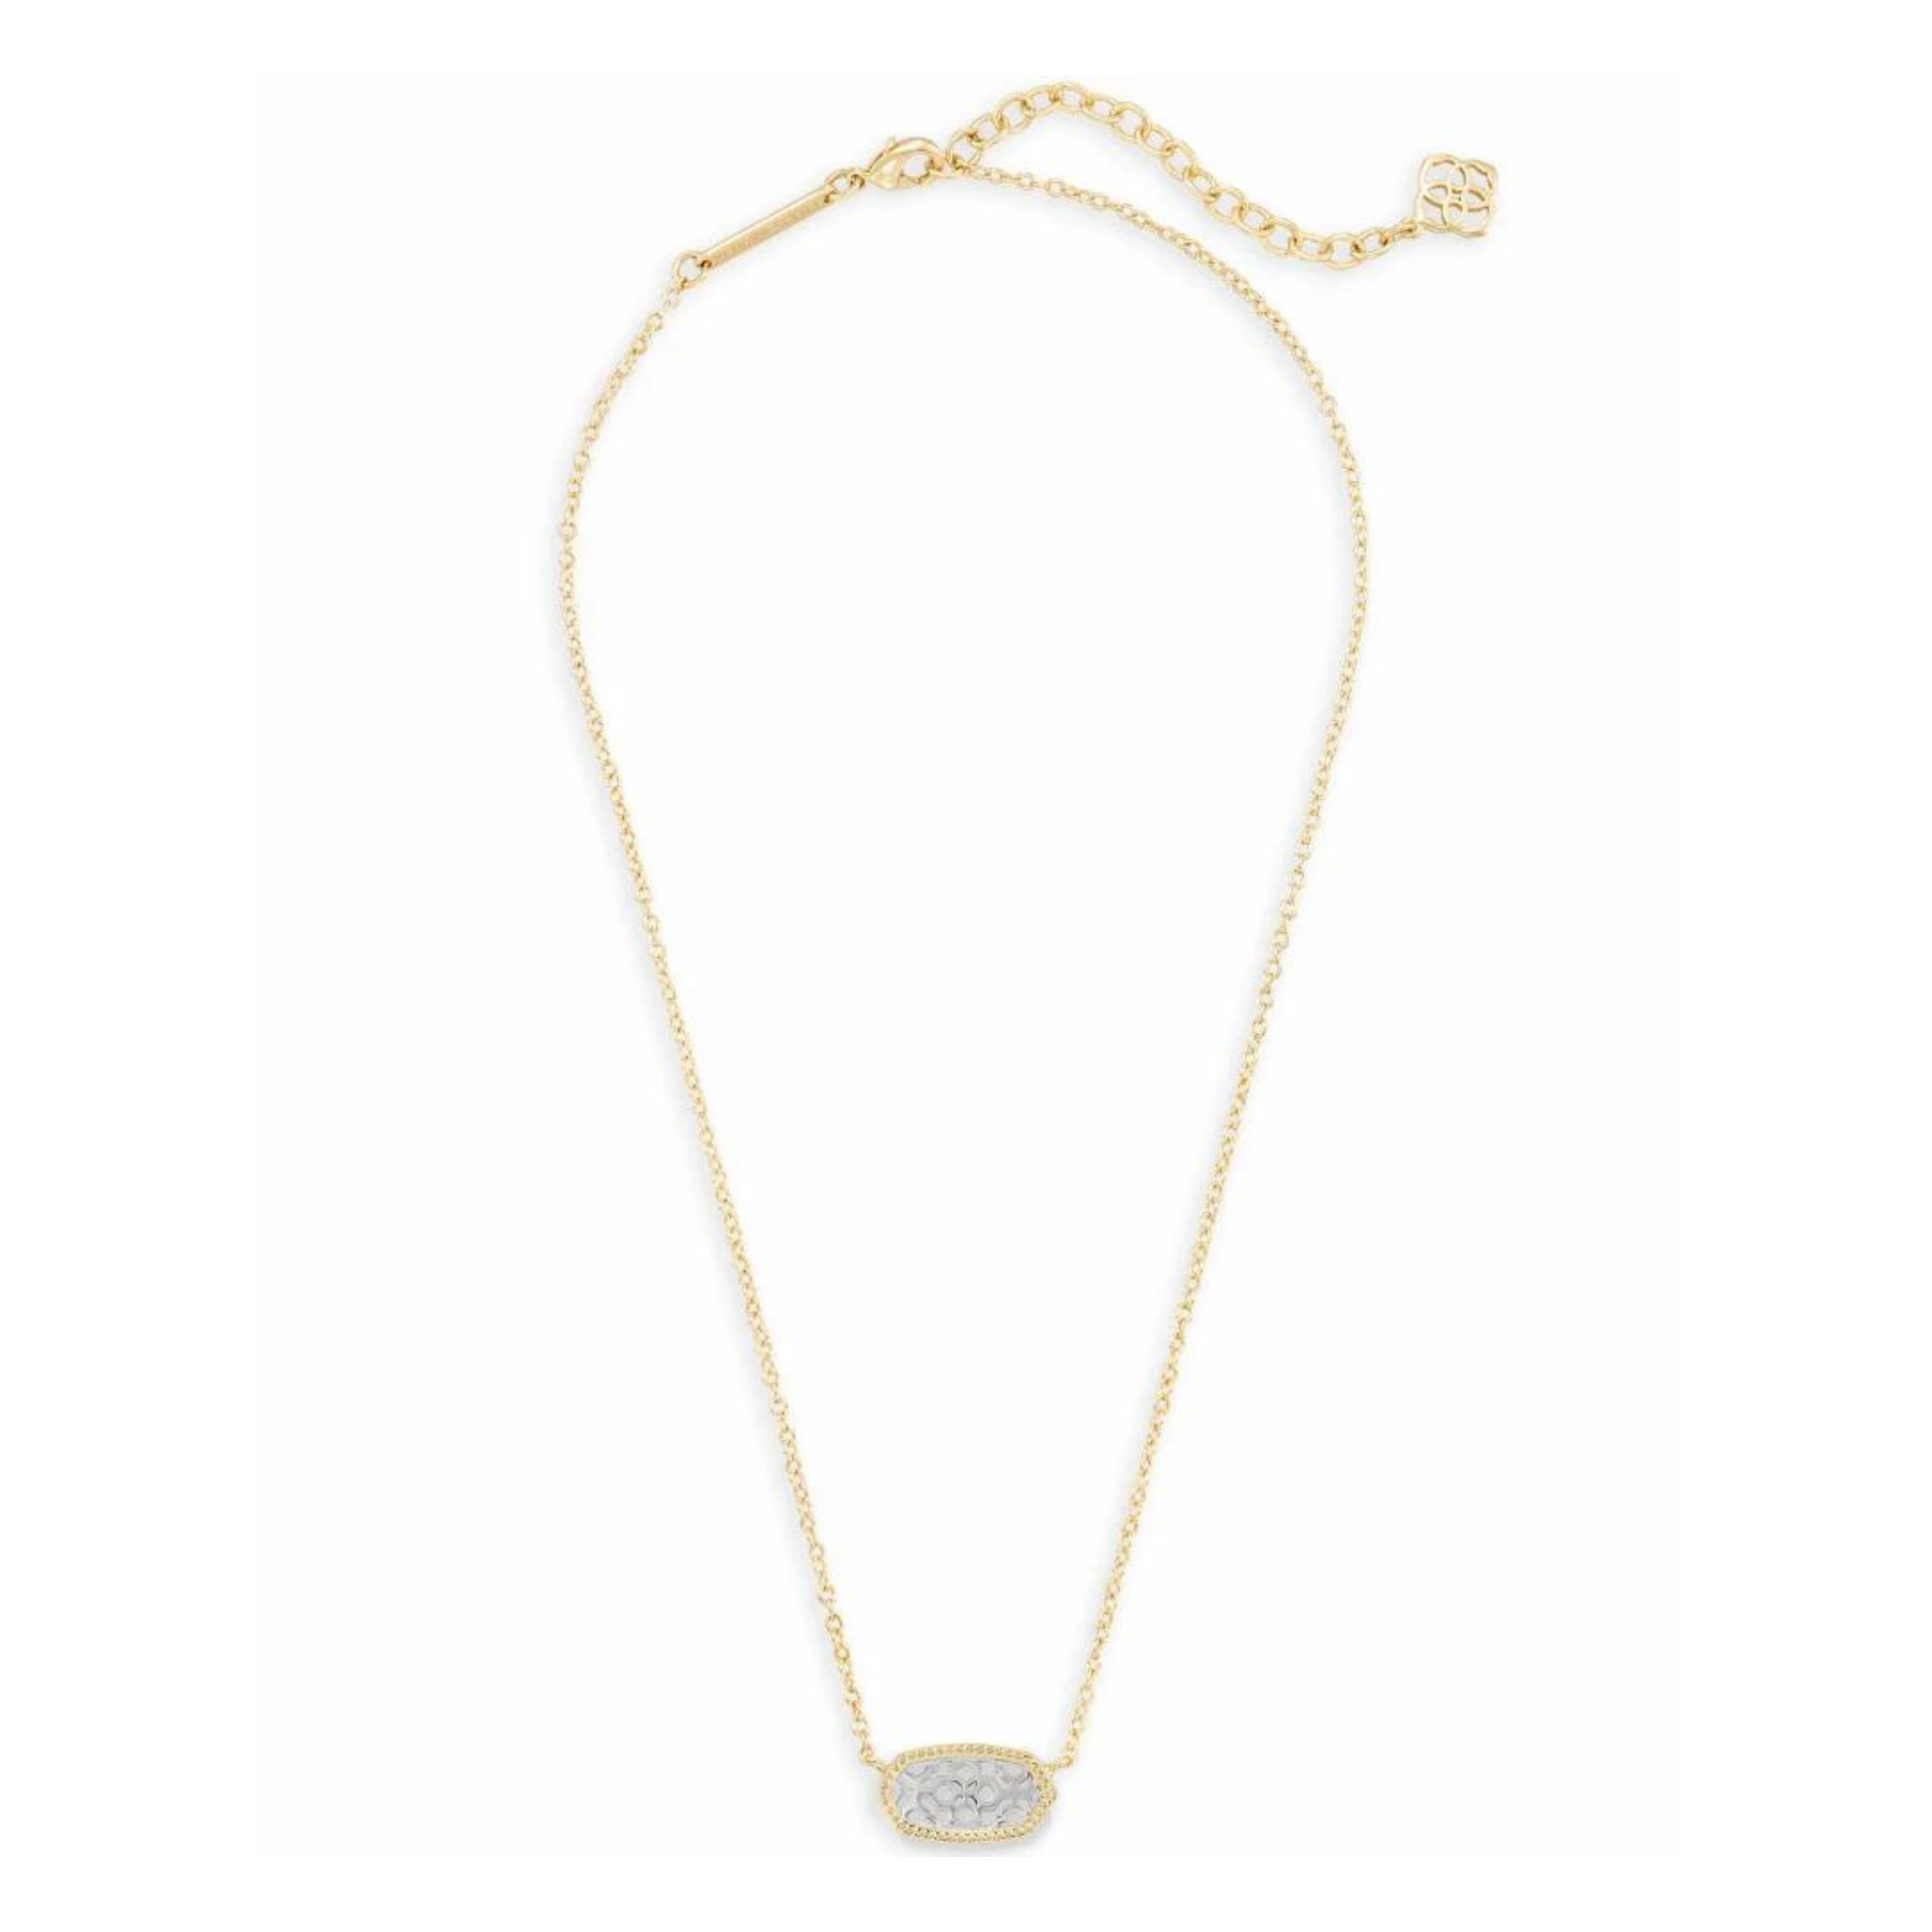 Kendra Scott | Elisa Gold Pendant Necklace in Silver Filigree - Giddy Up Glamour Boutique